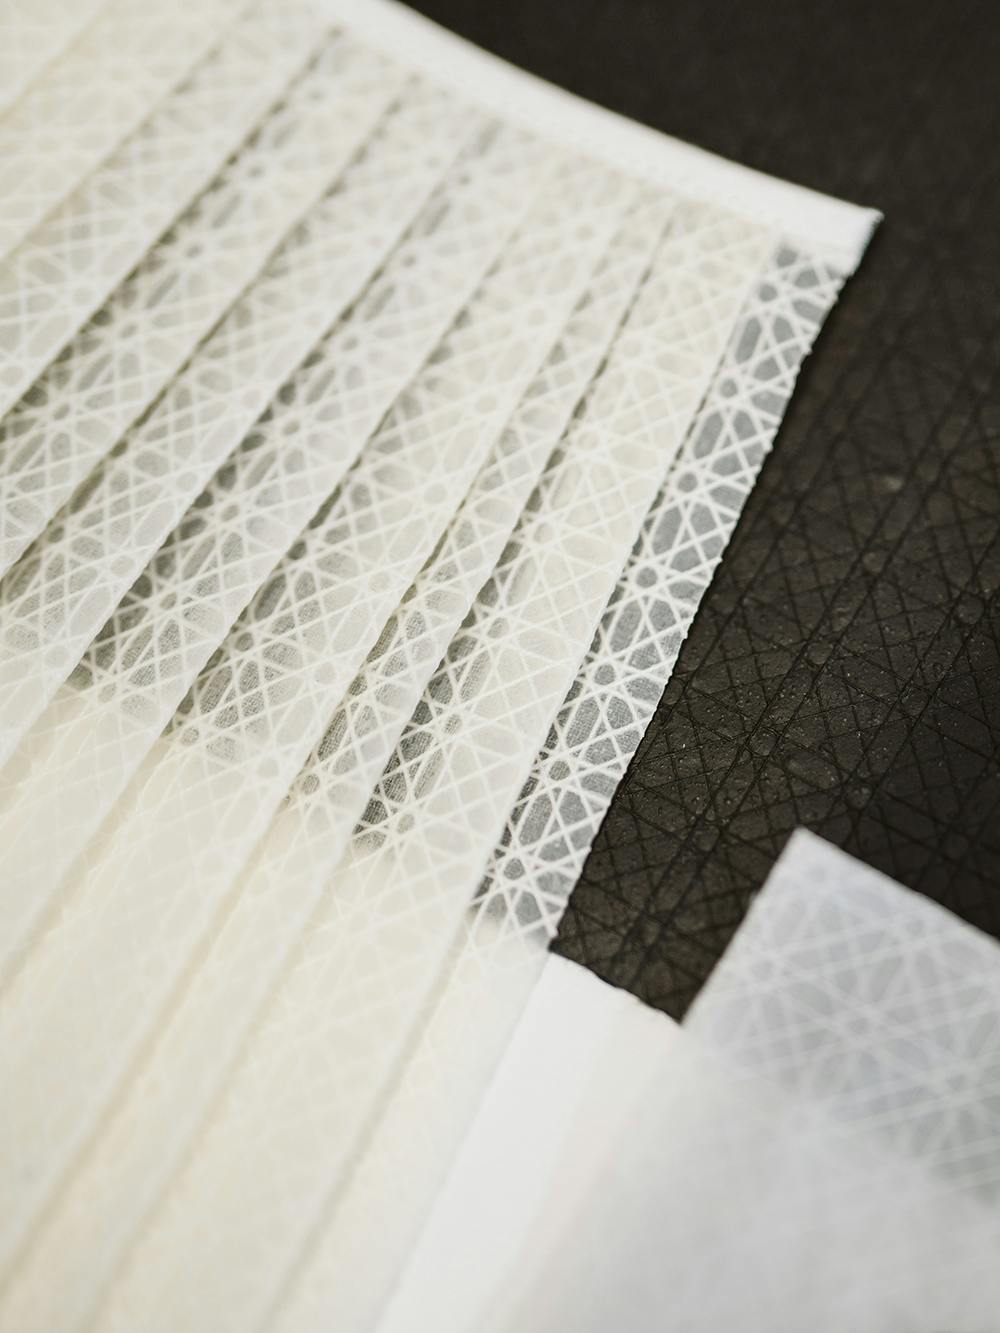 Black and white non-woven materials that have been made with bacteria and natural textile scaffolding